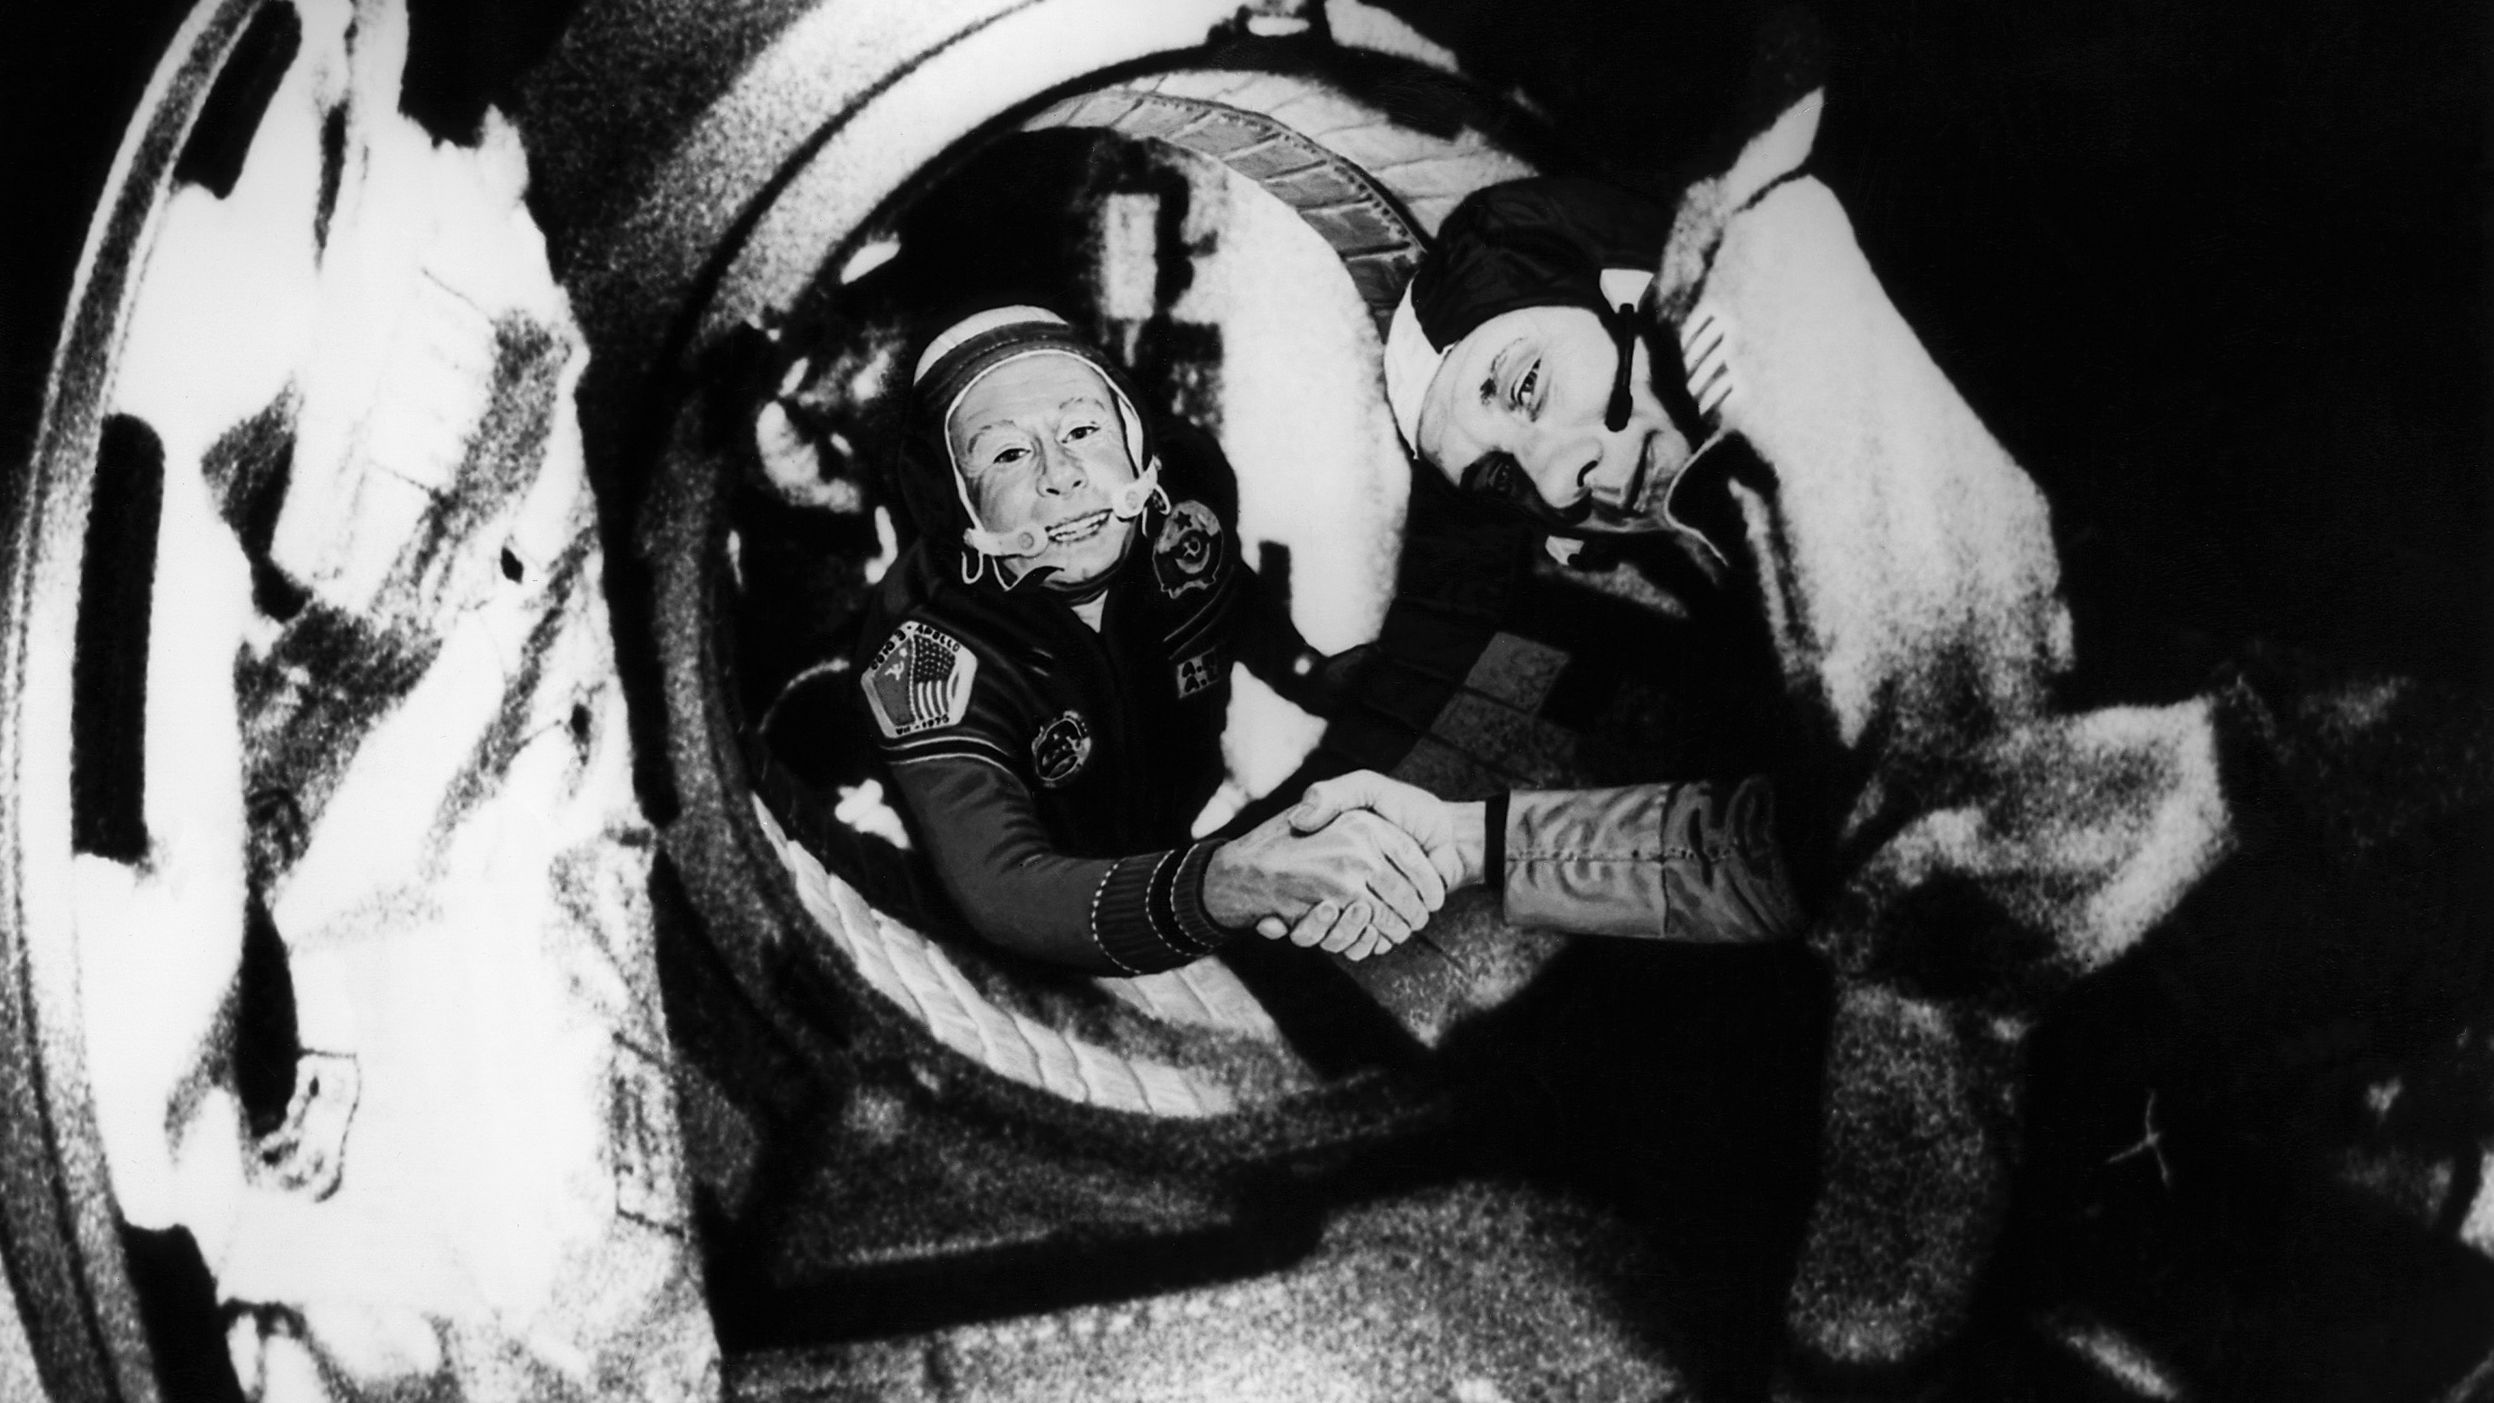 Soyuz 19 commander Alexei Leonov, left, shakes hands with Thomas Stafford, commander of the Apollo 18, on that first joint mission in 1975.